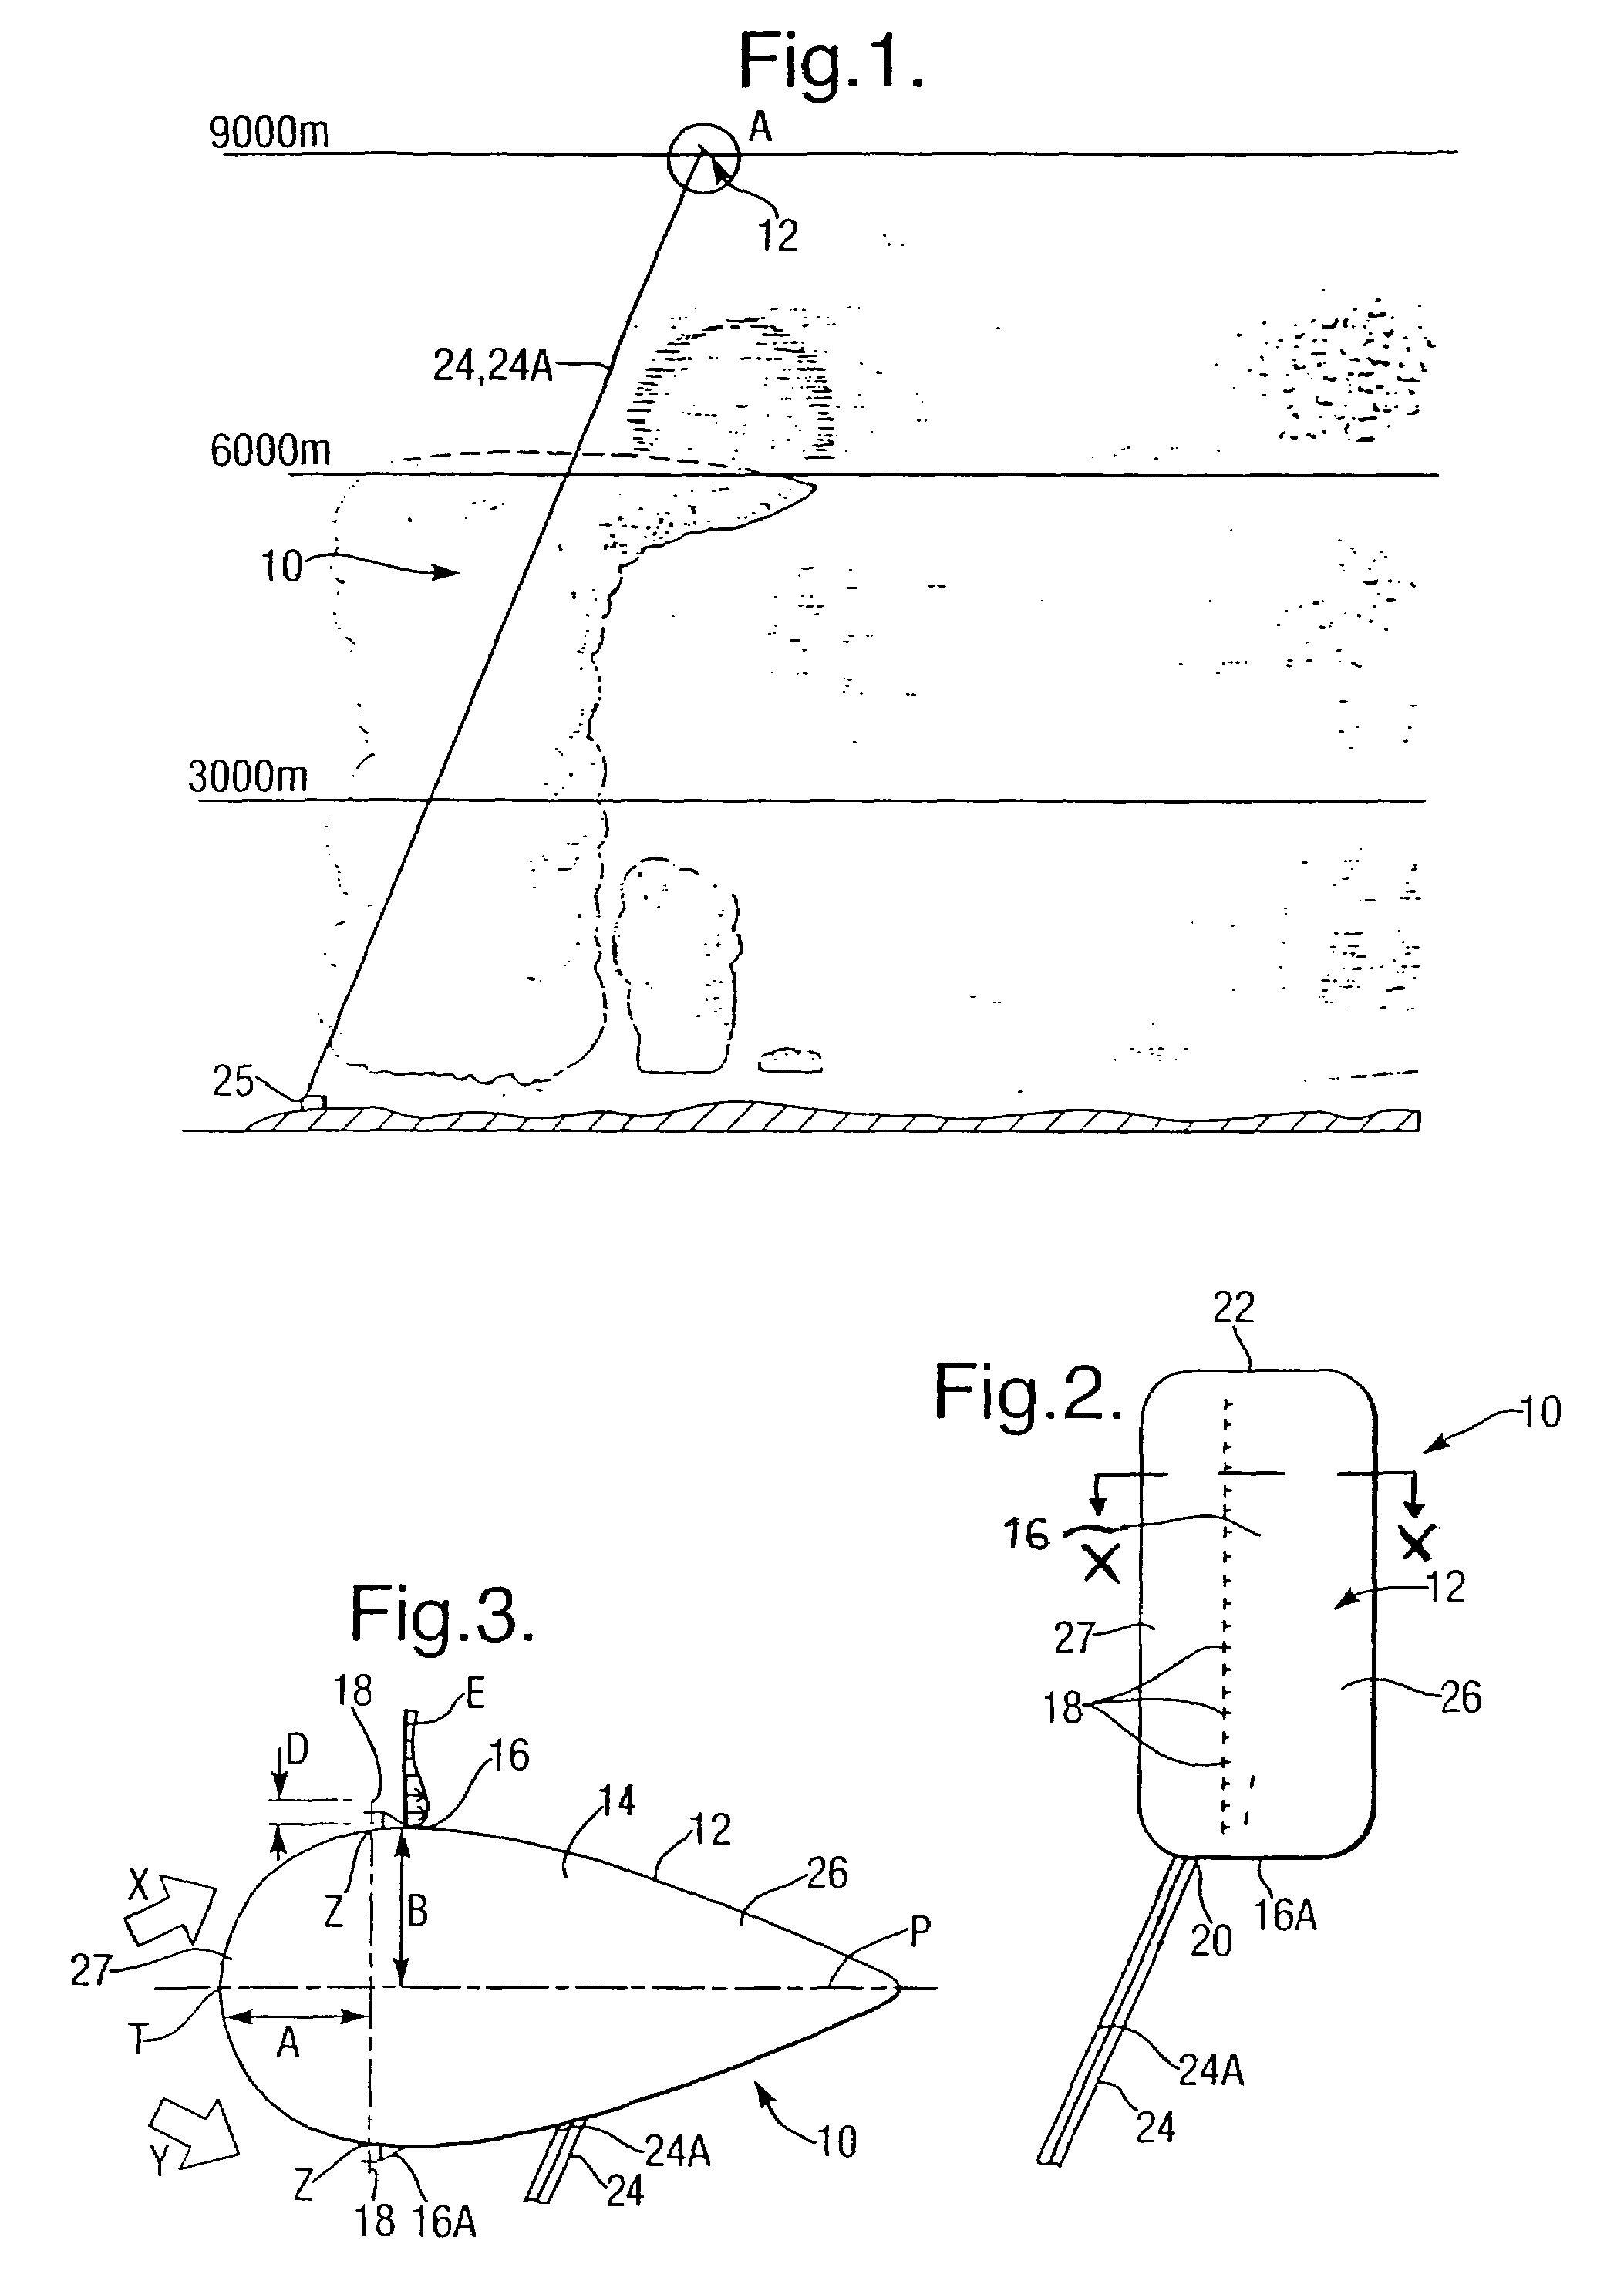 Electrical power generation assembly